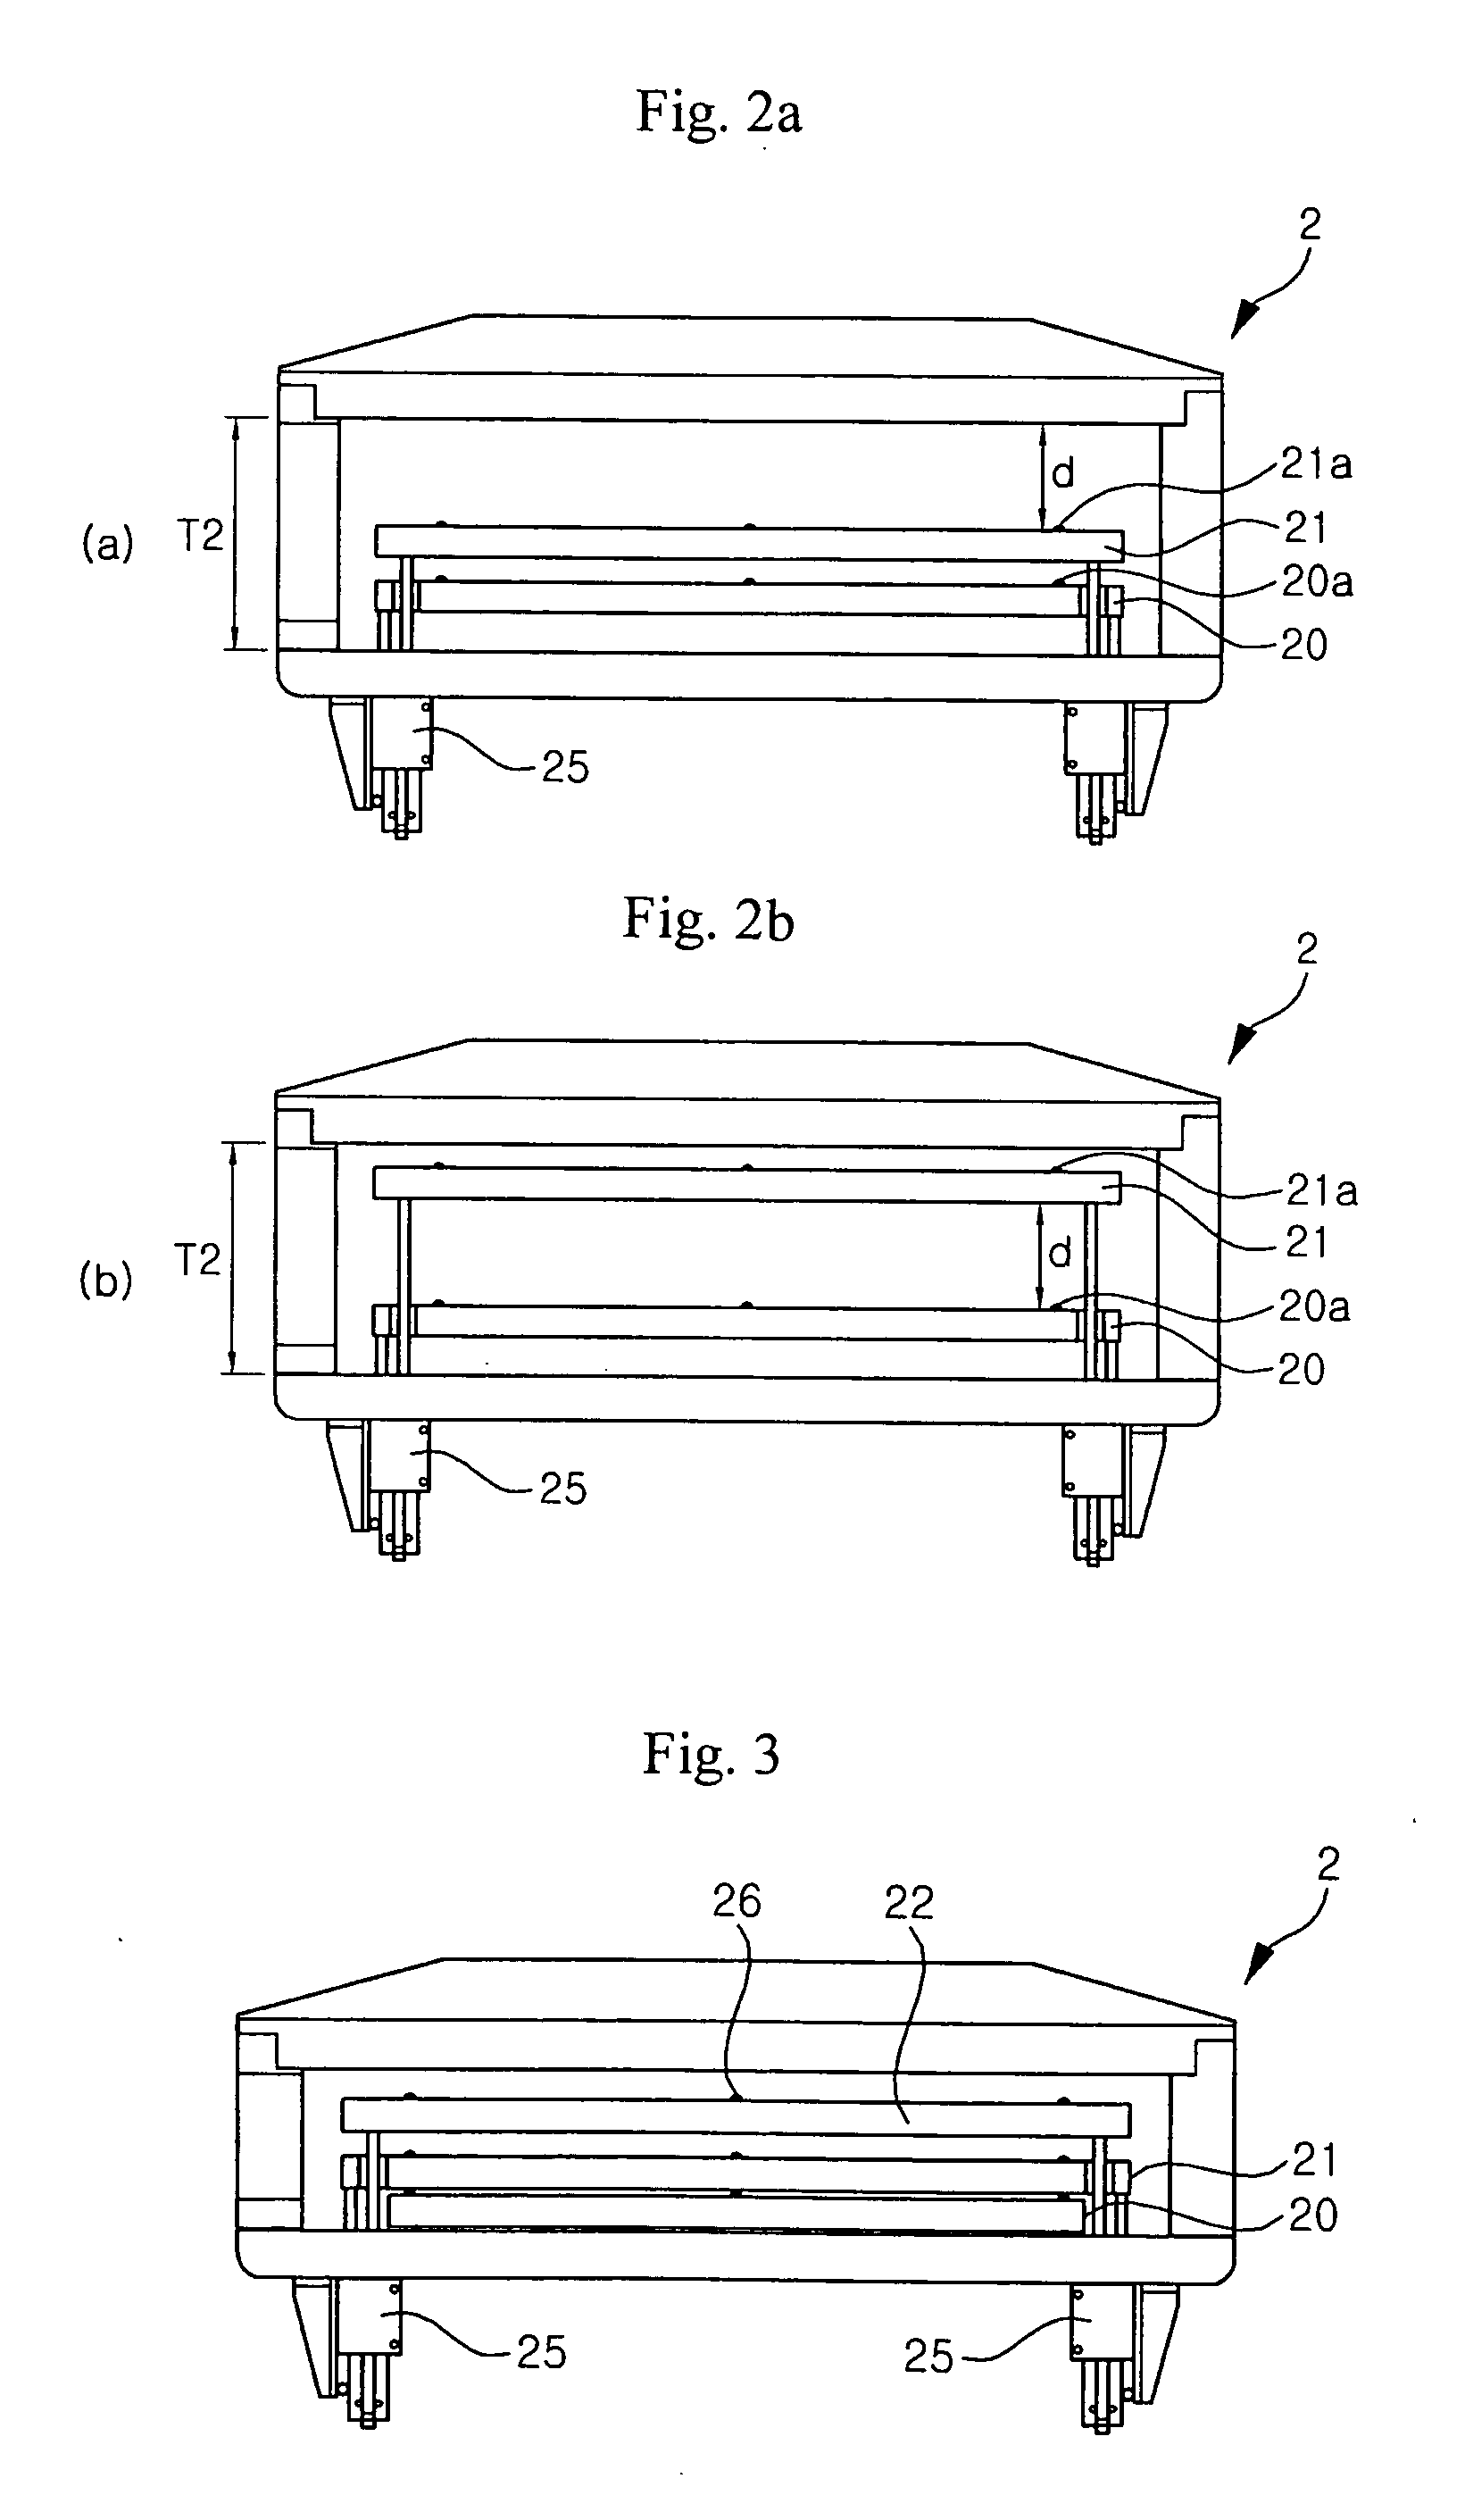 Load lock and load lock chamber using the same